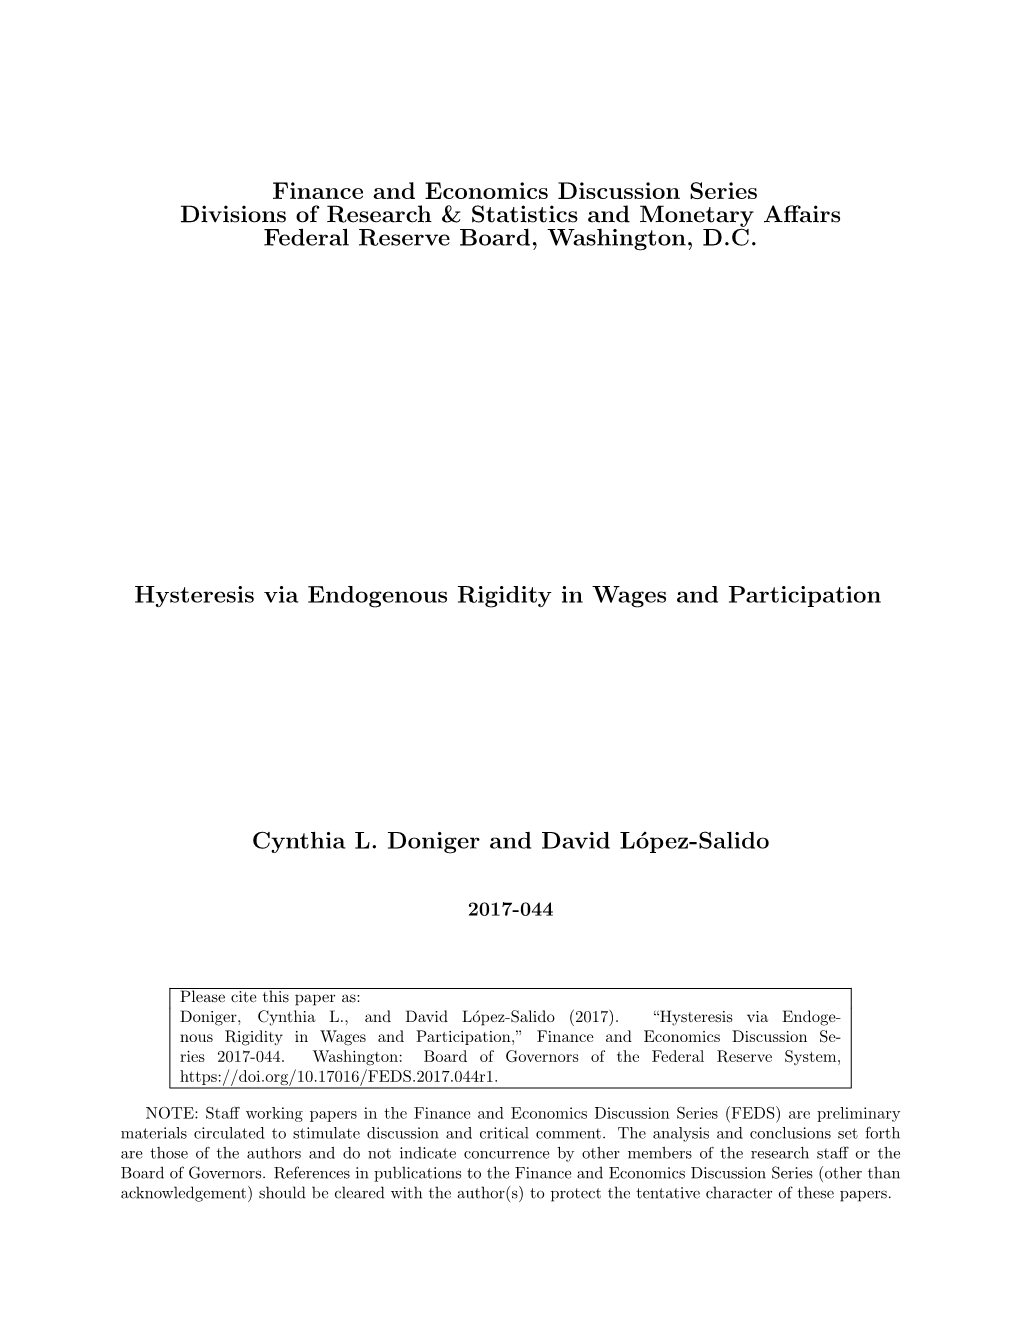 Hysteresis Via Endogenous Rigidity in Wages and Participation